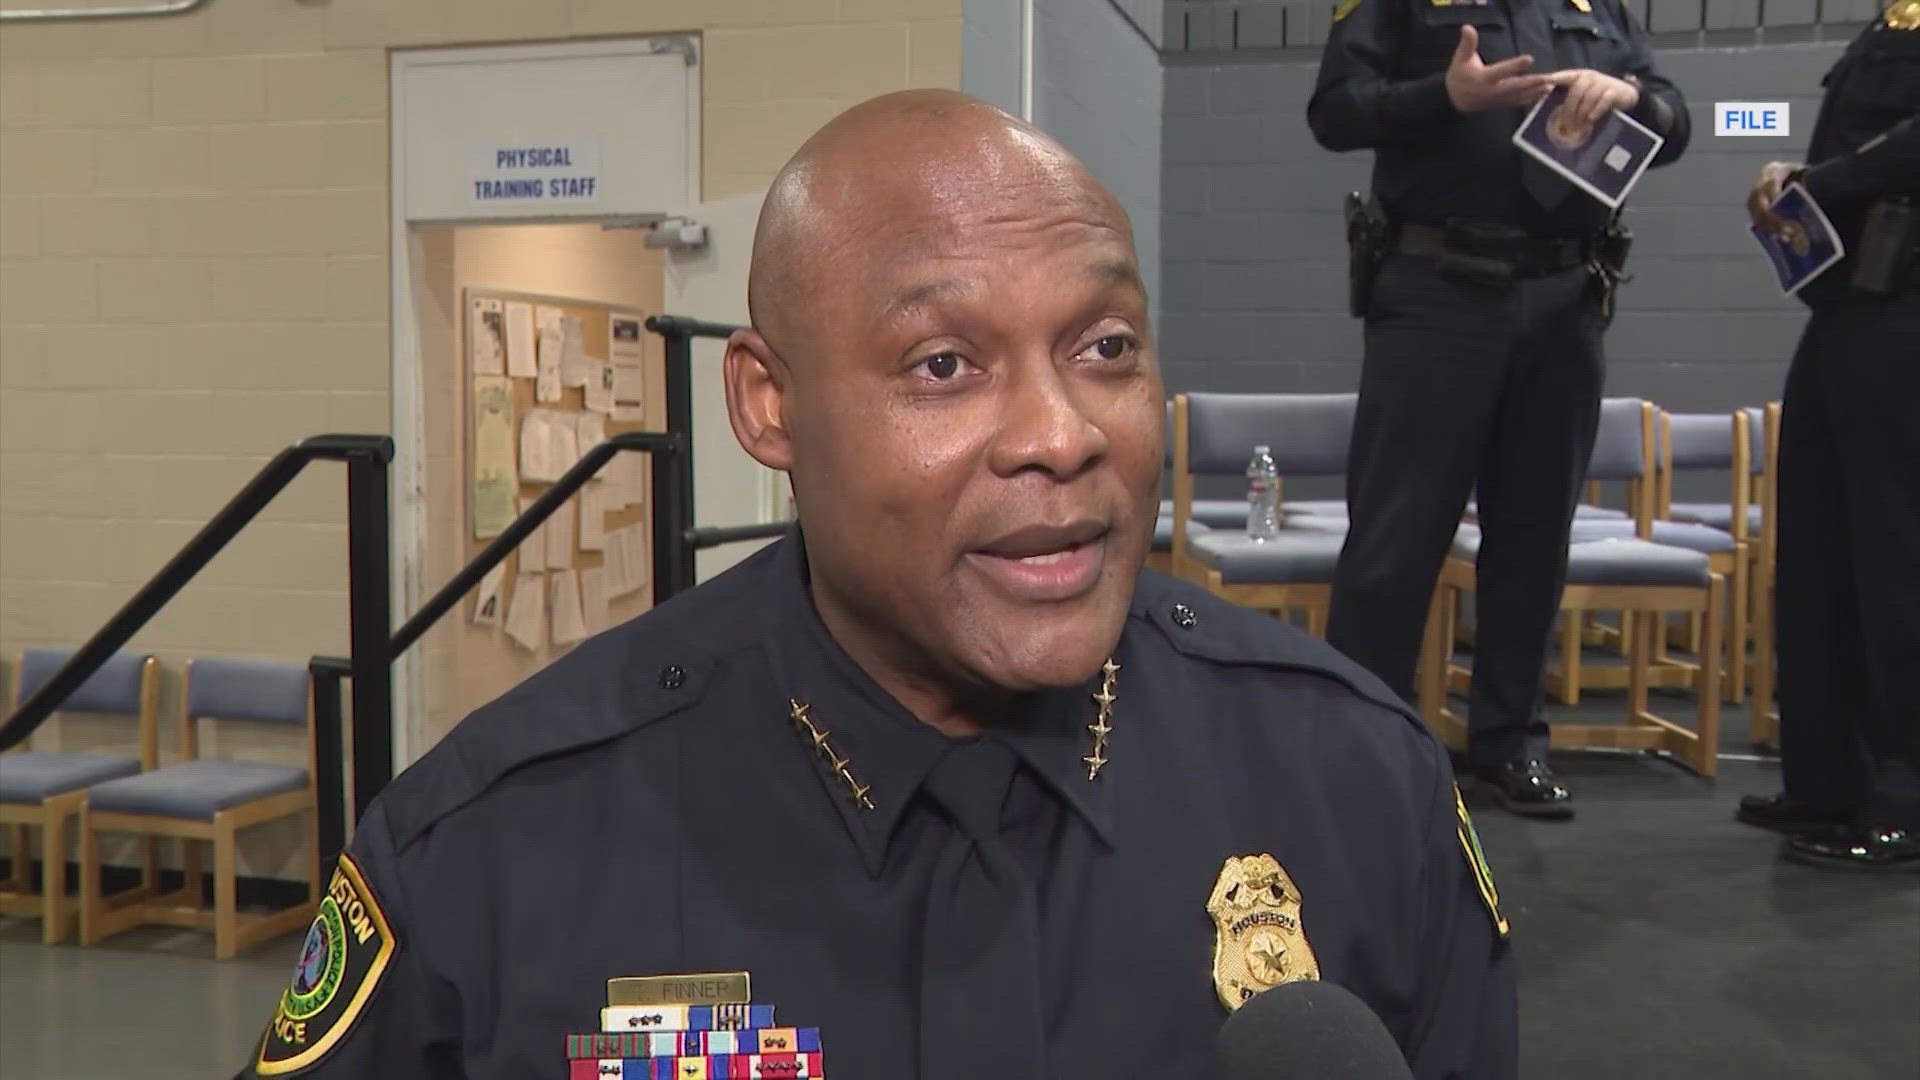 As of 10:31 p.m., Tuesday, HPD Chief Troy Finner submitted his retirement and his temporary replacement was announced.